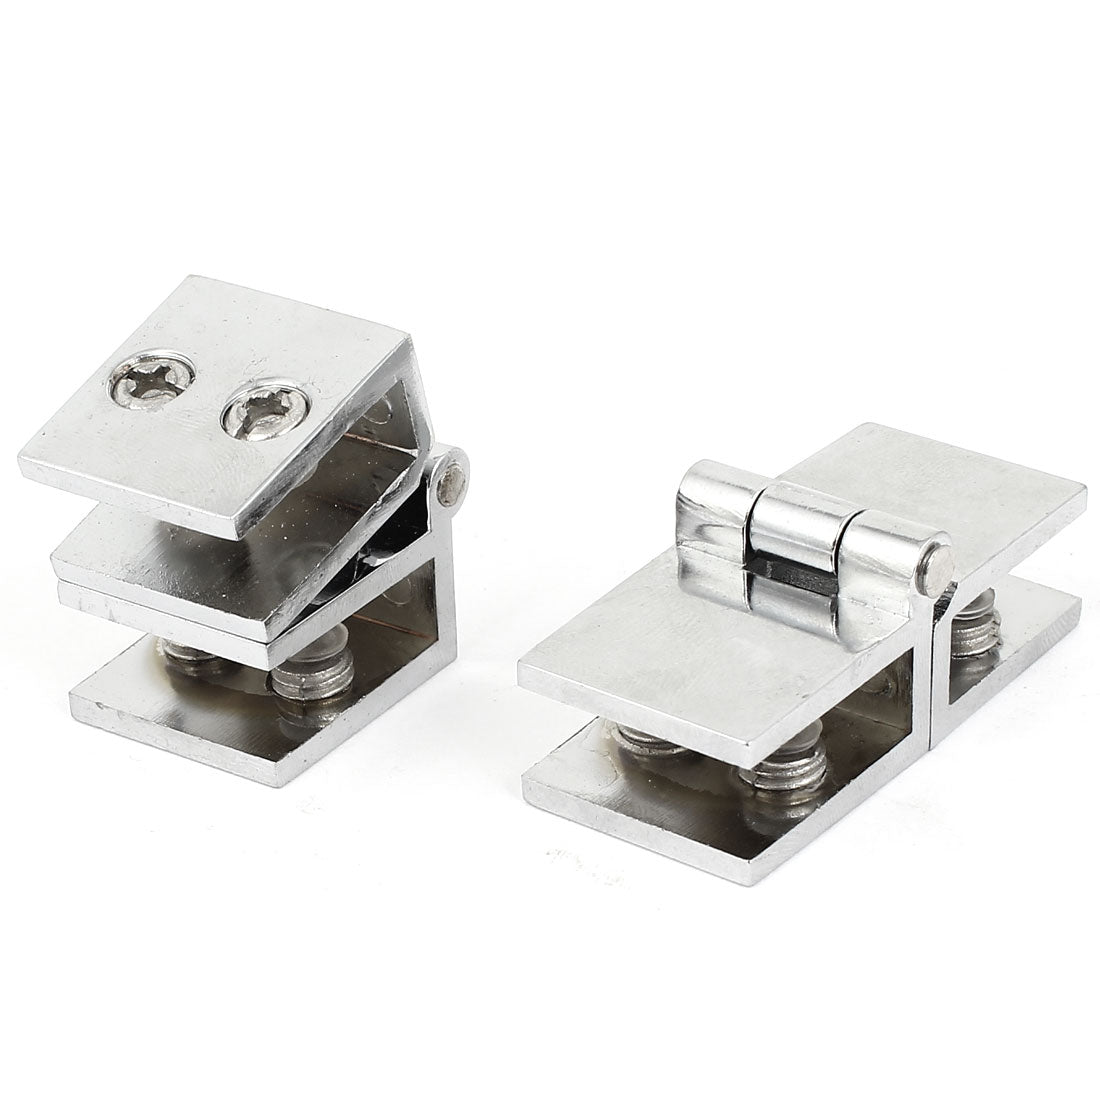 uxcell Uxcell 5mm Thickness Glass To Glass Hinge 180 Degree Adjustable Swing Cabinet Showcase Clamp 2 Pcs